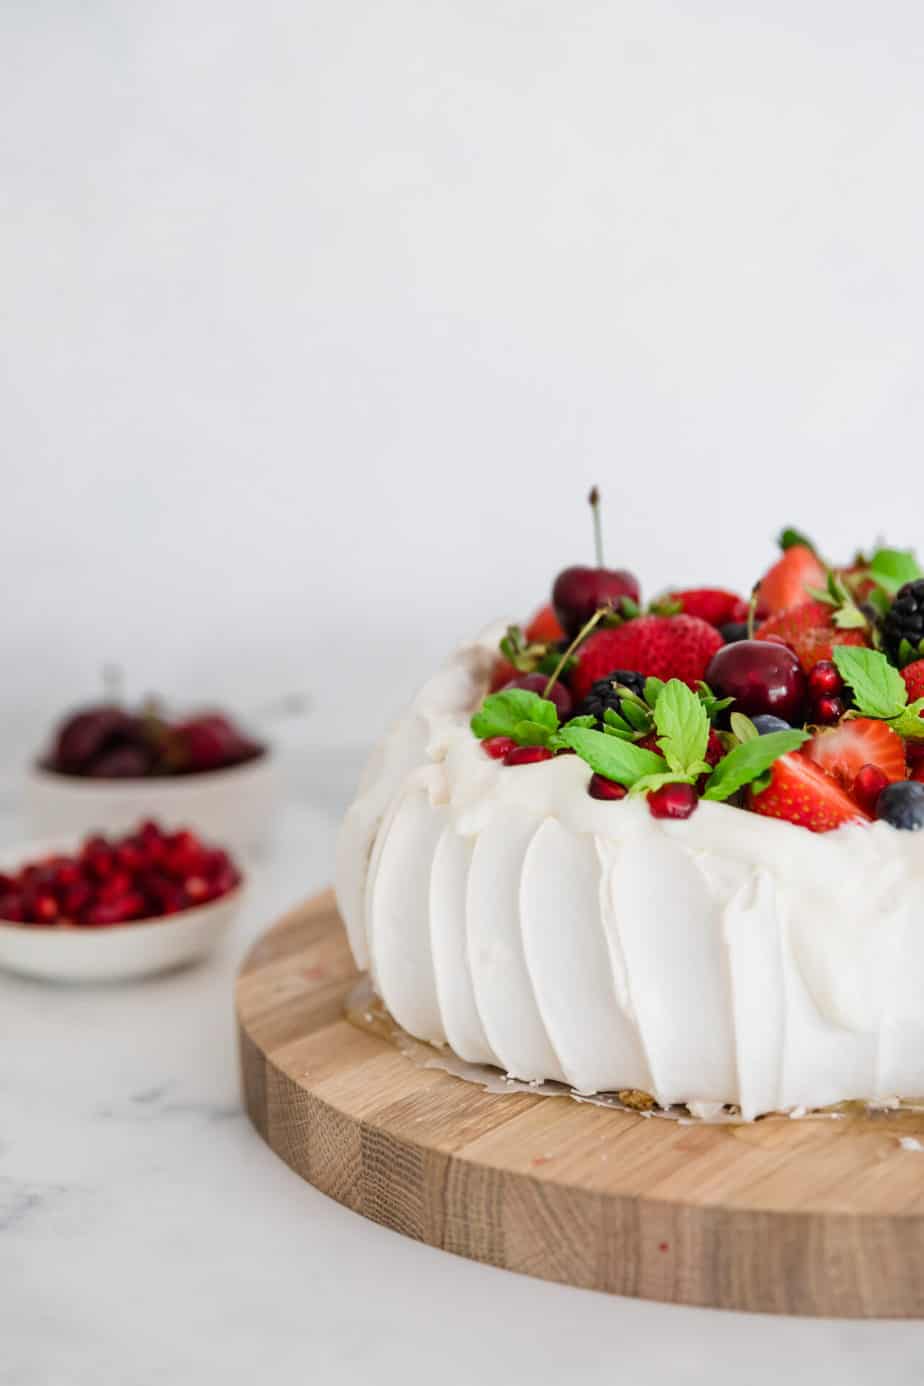 A pavlova topped with mixed berries and fresh mint